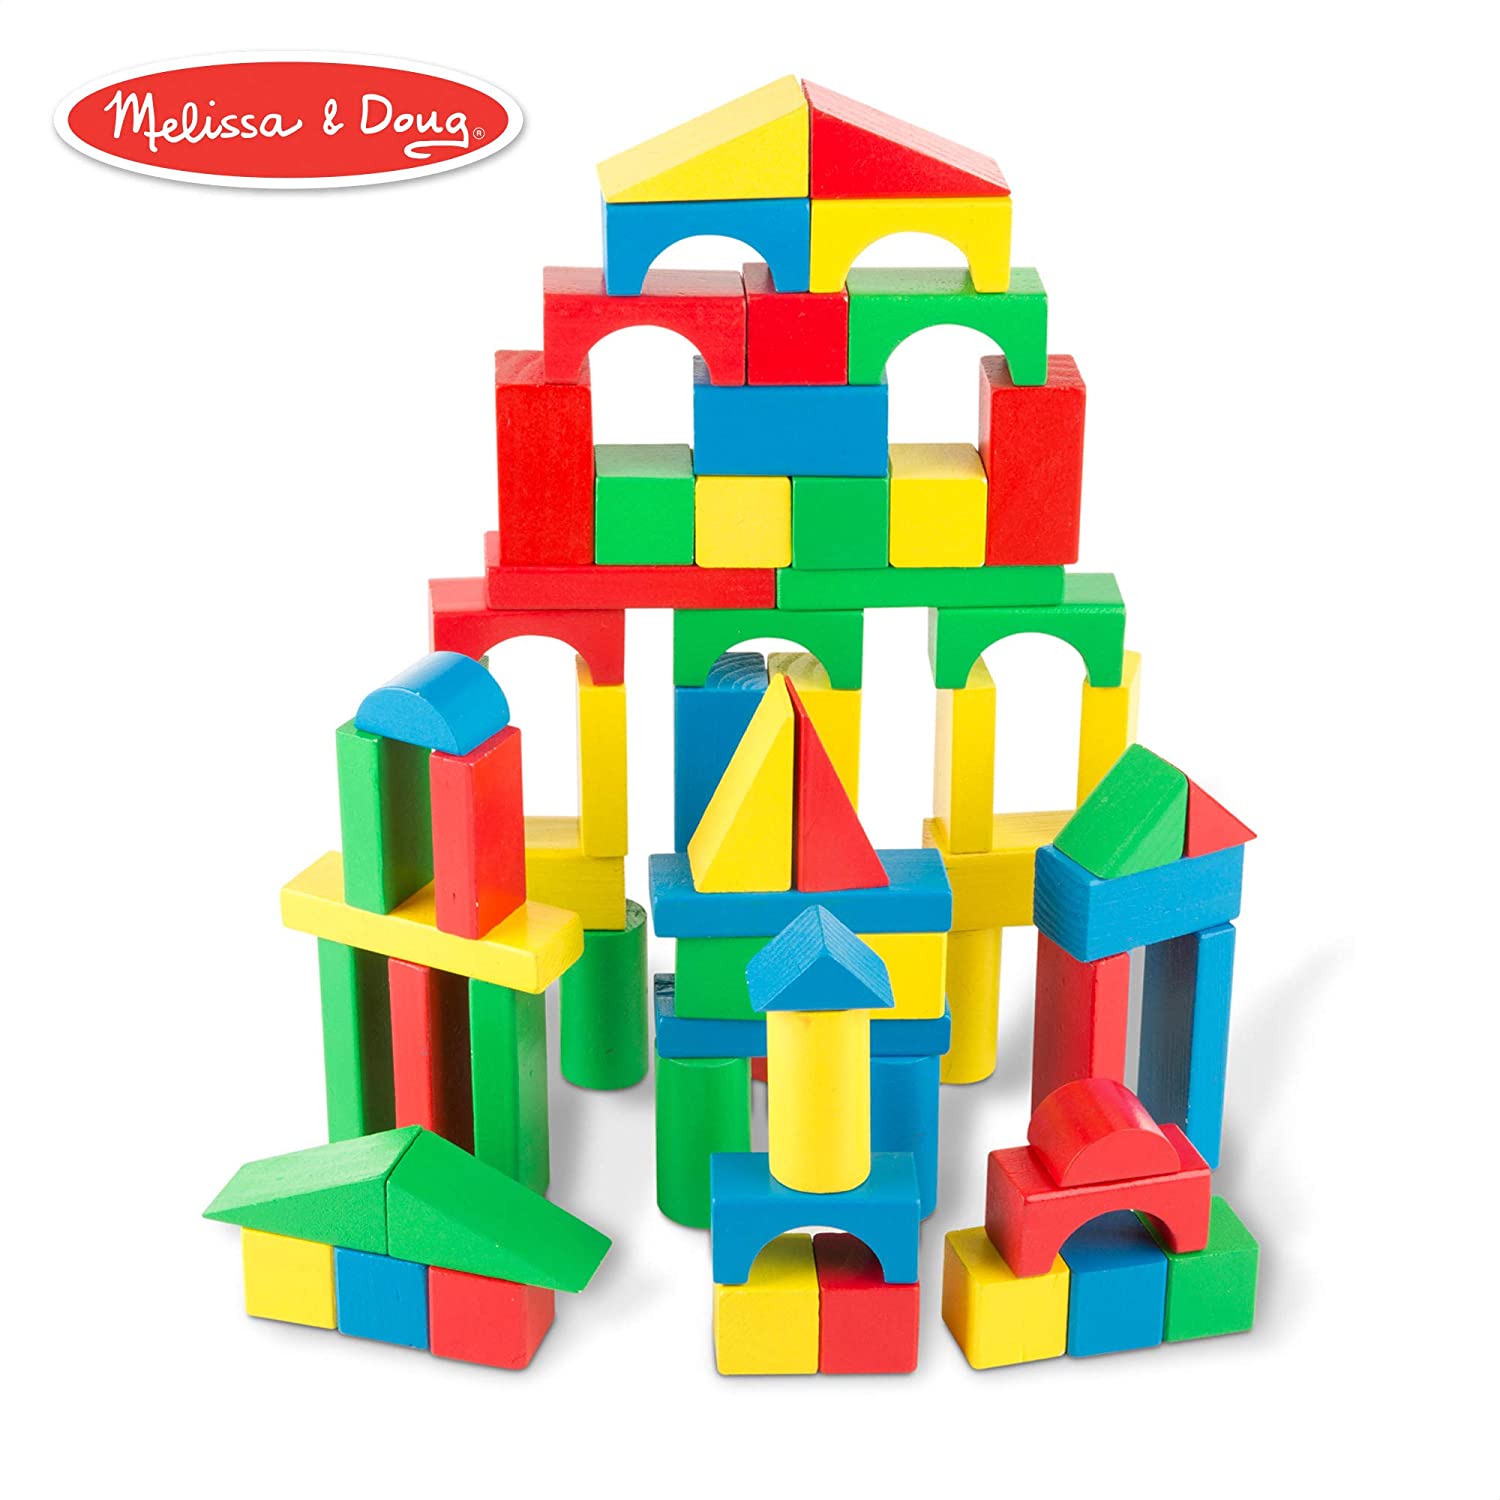 7 Best Baby Blocks 2023 - Buying Guide & Reviews 2